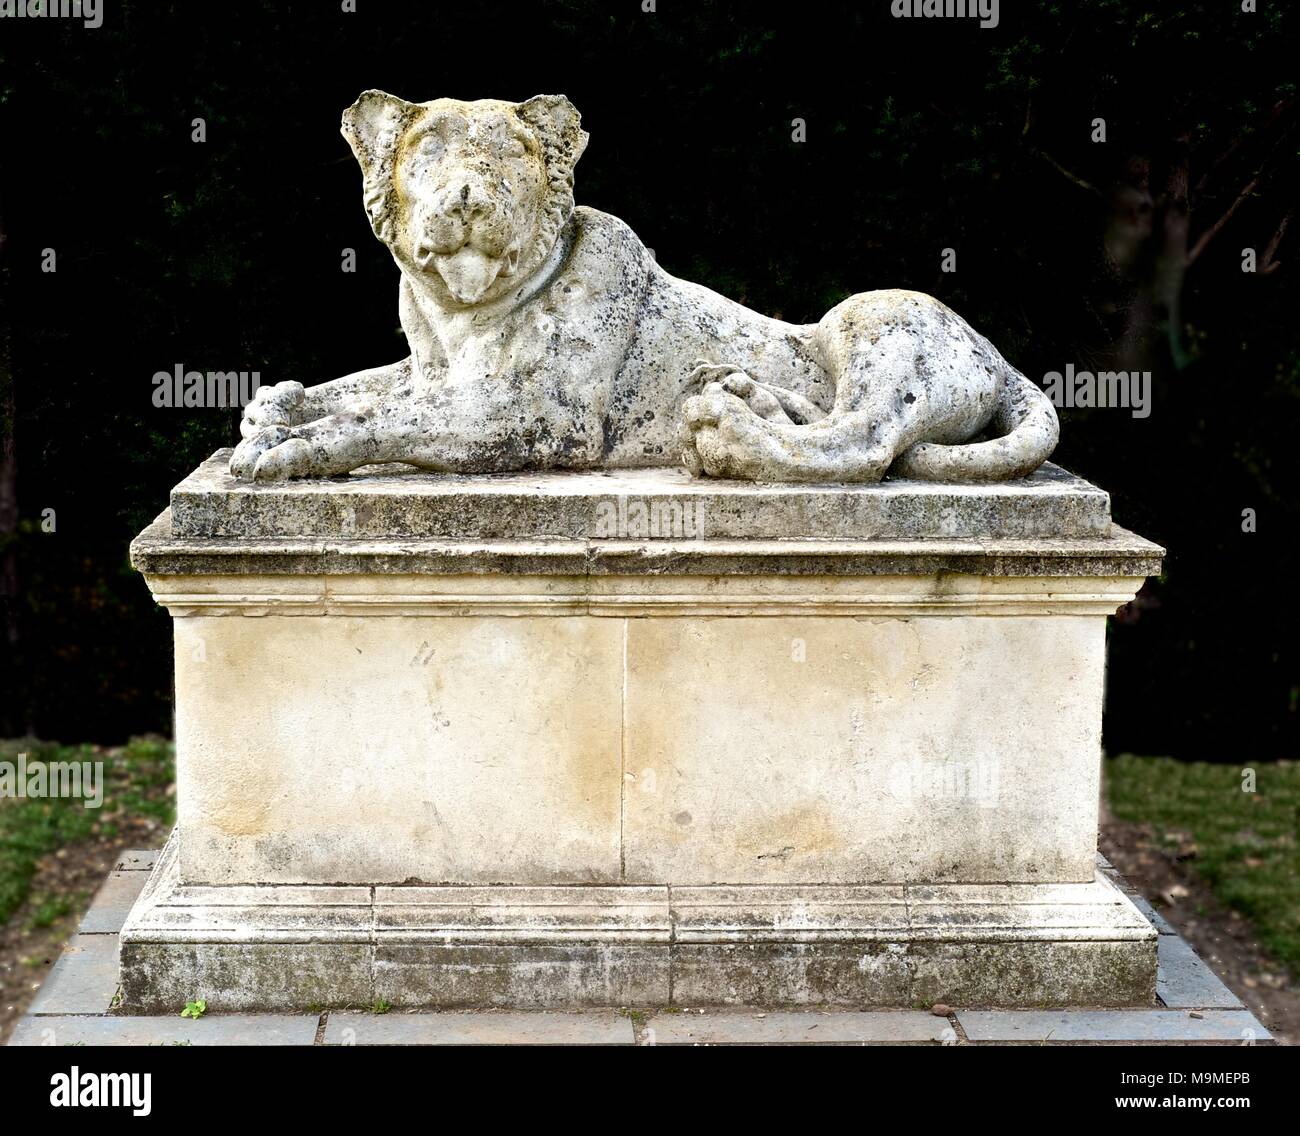 monumental lion sculpture on plinth against dark background, Chiswick House, West London, England Stock Photo